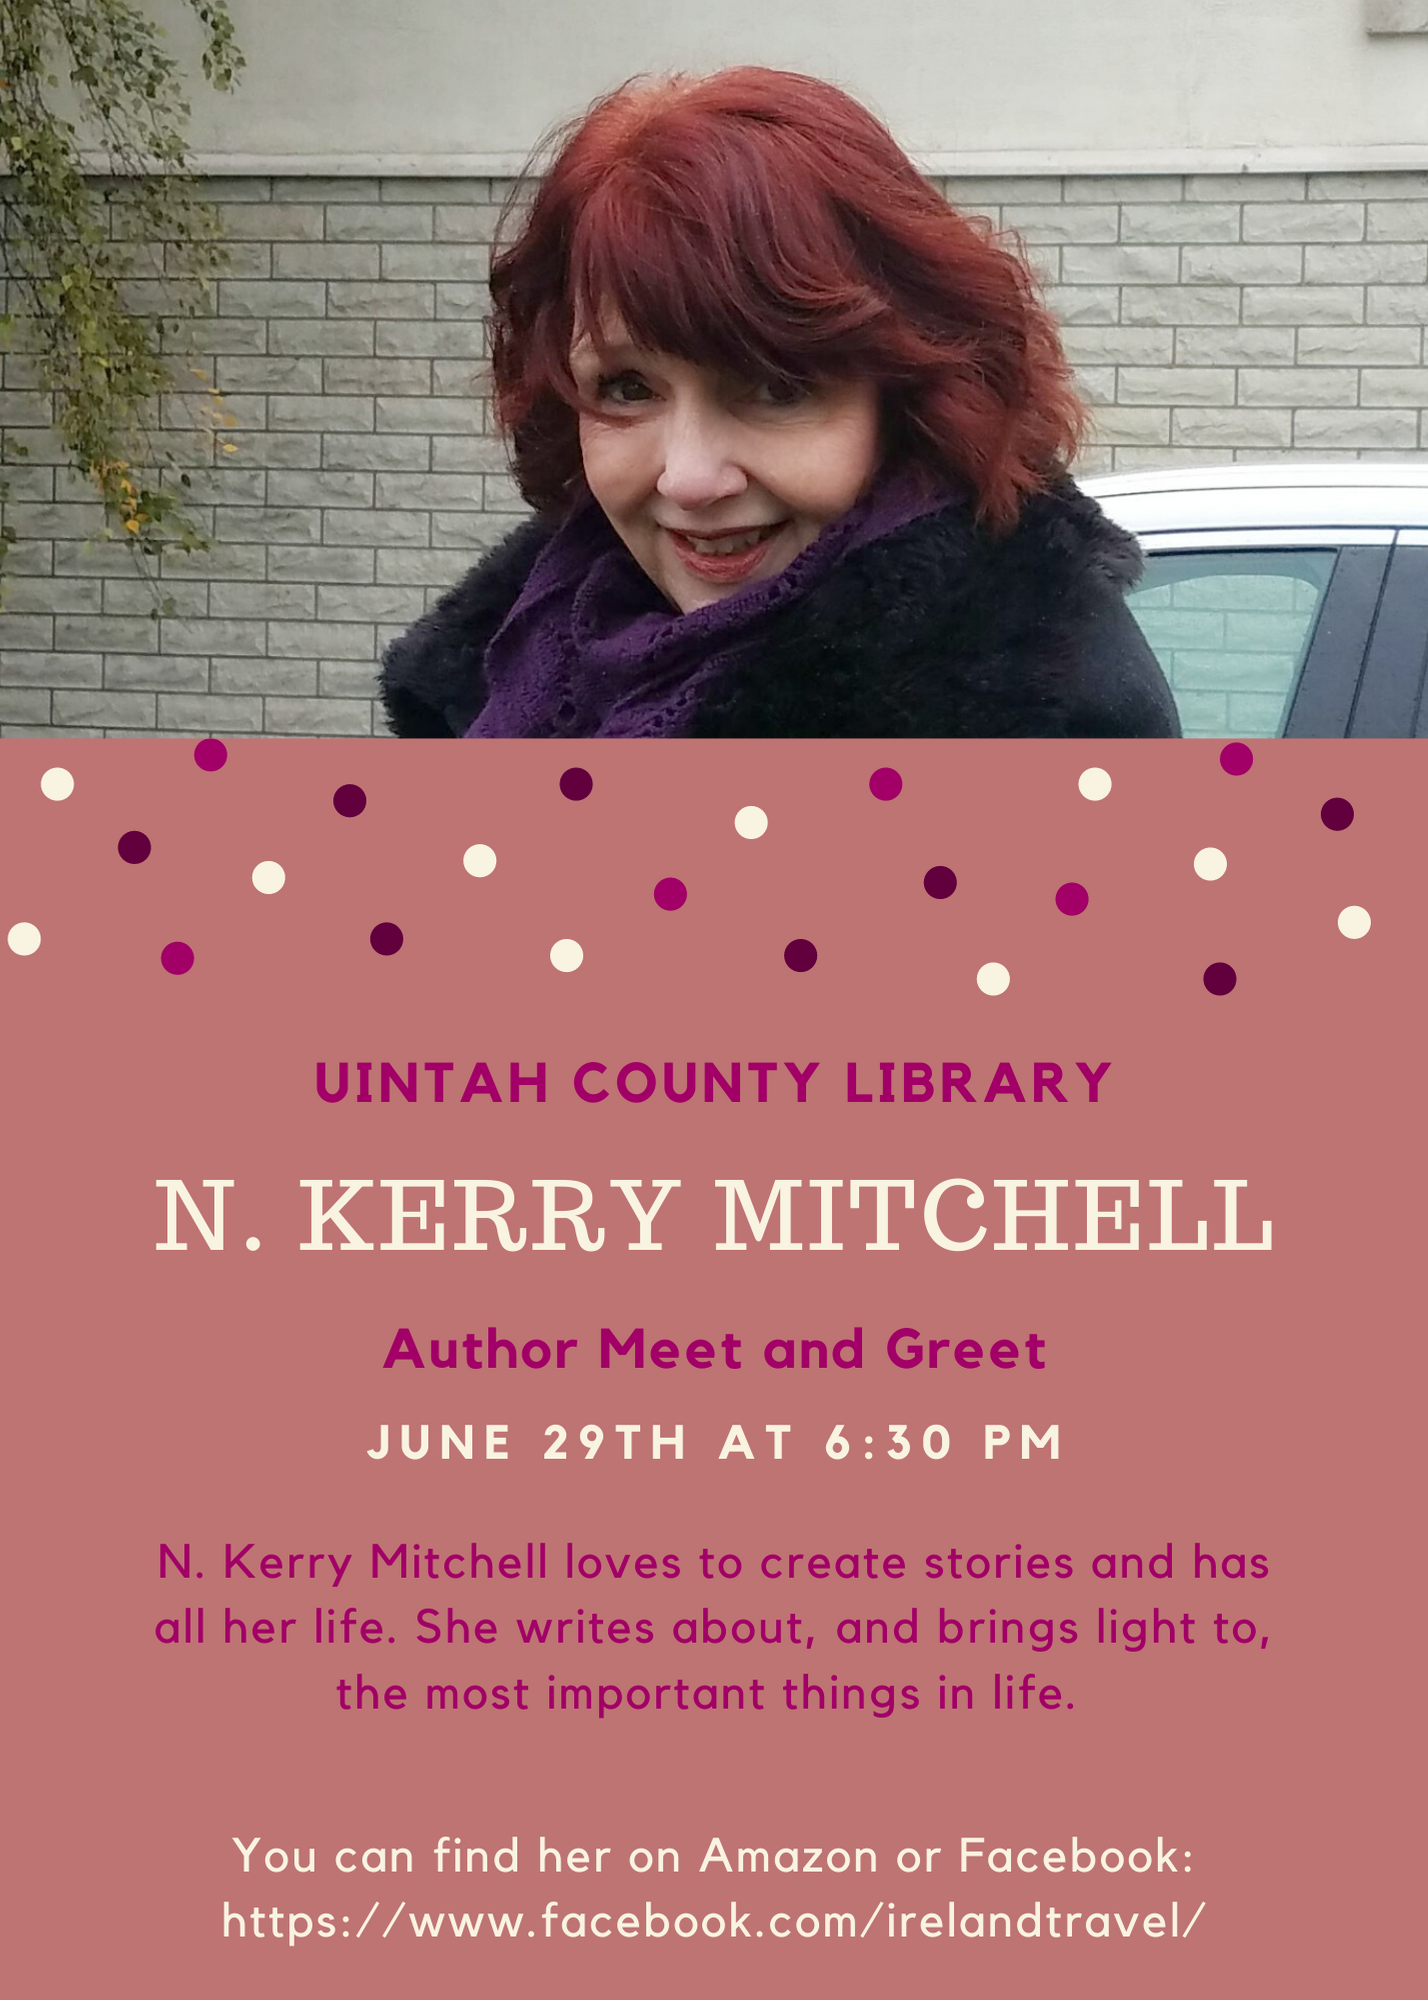 Uintah County Library presents N. Kerry Mitchell Author Meet and Greet June 29th at 6:30 p.m. 